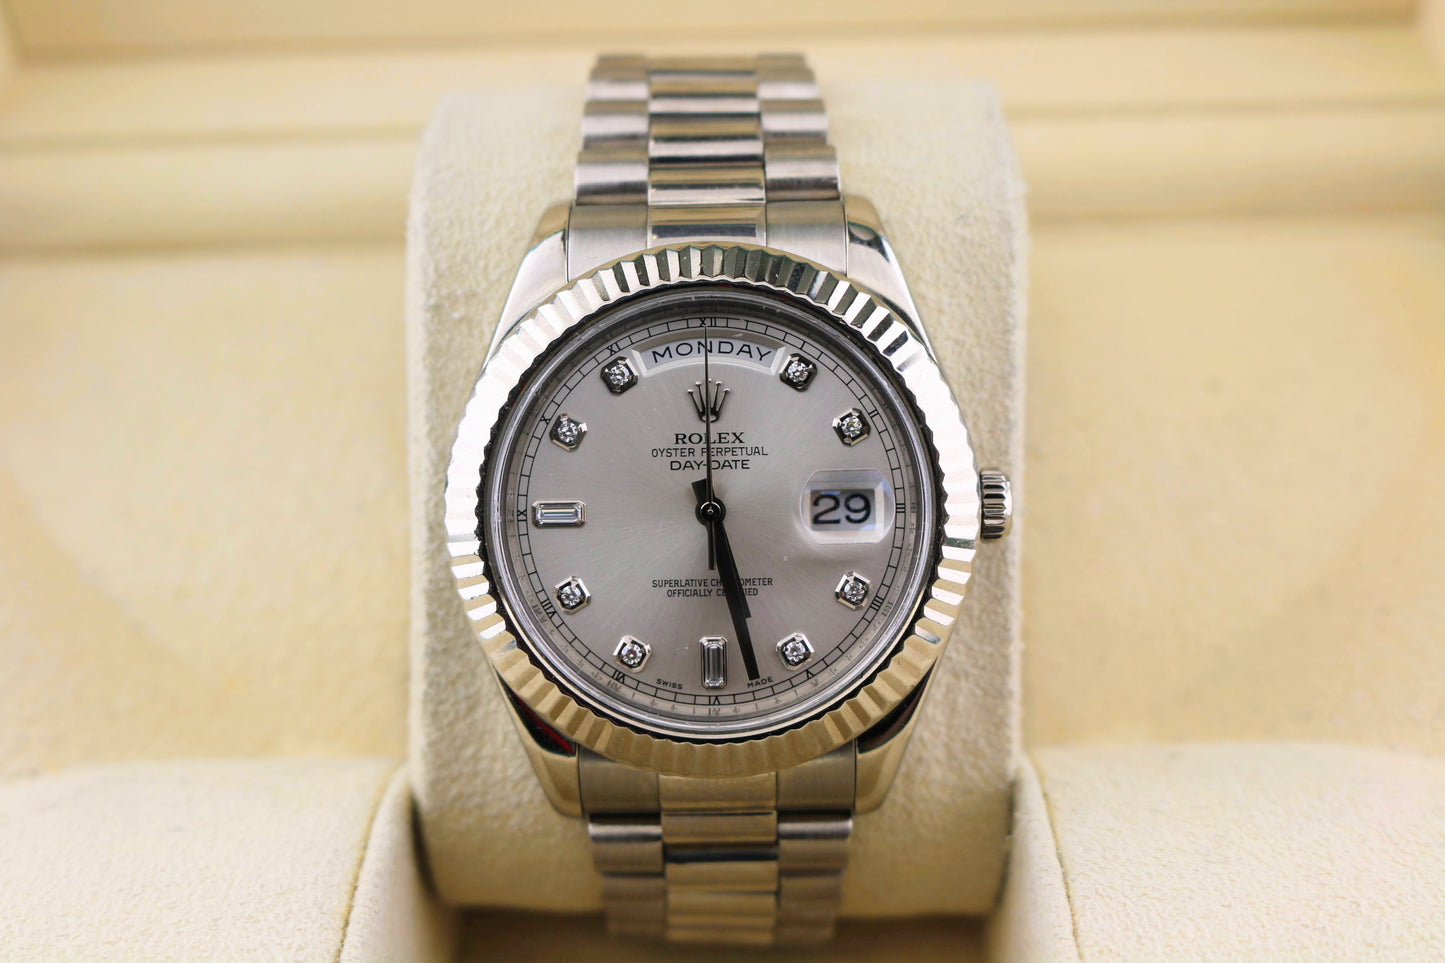 OH 2009 Rolex Day-Date 218239 Silver Diamond Dial White Gold Bracelet No Papers 41m